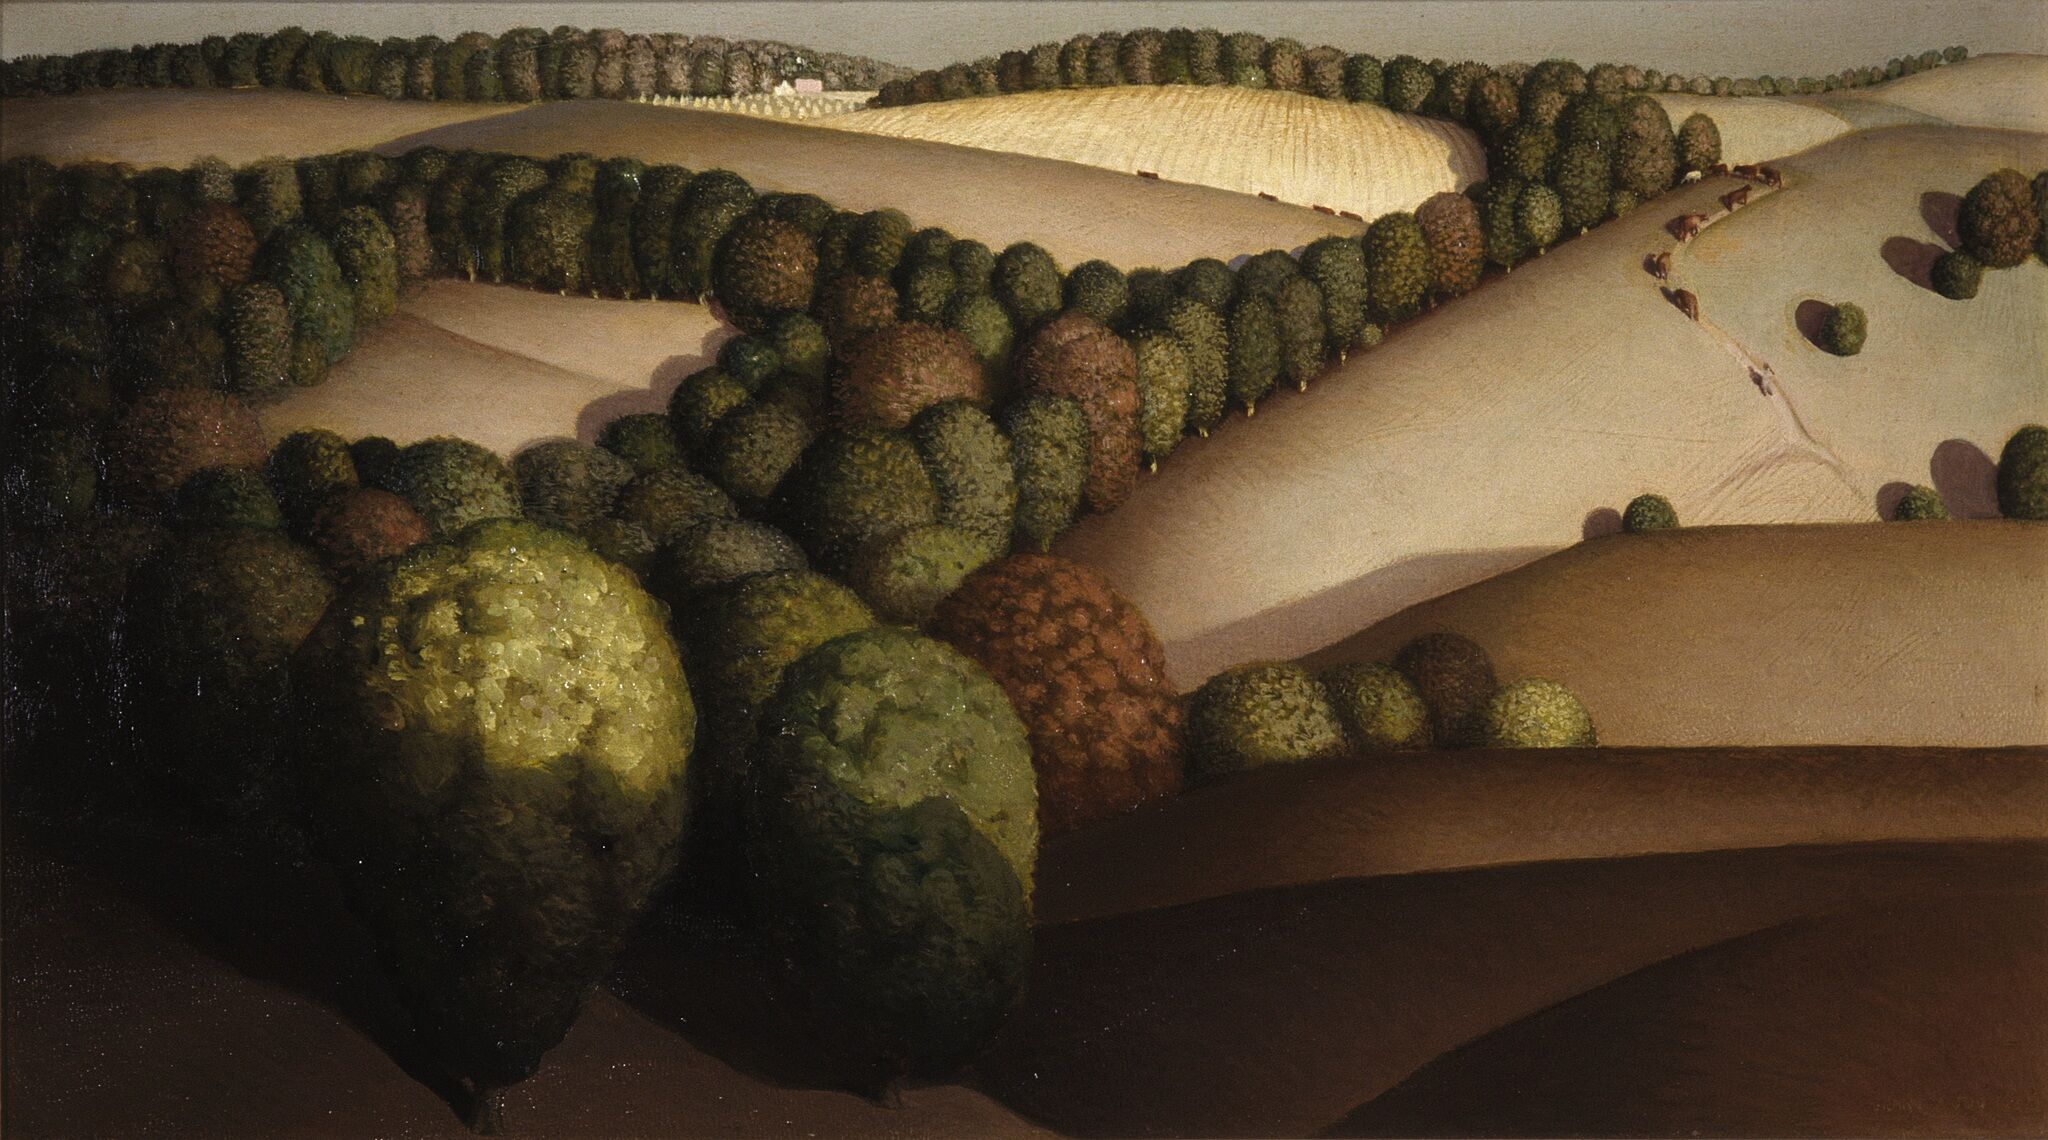 Aerial view painting of farm land with shadows descending over trees.